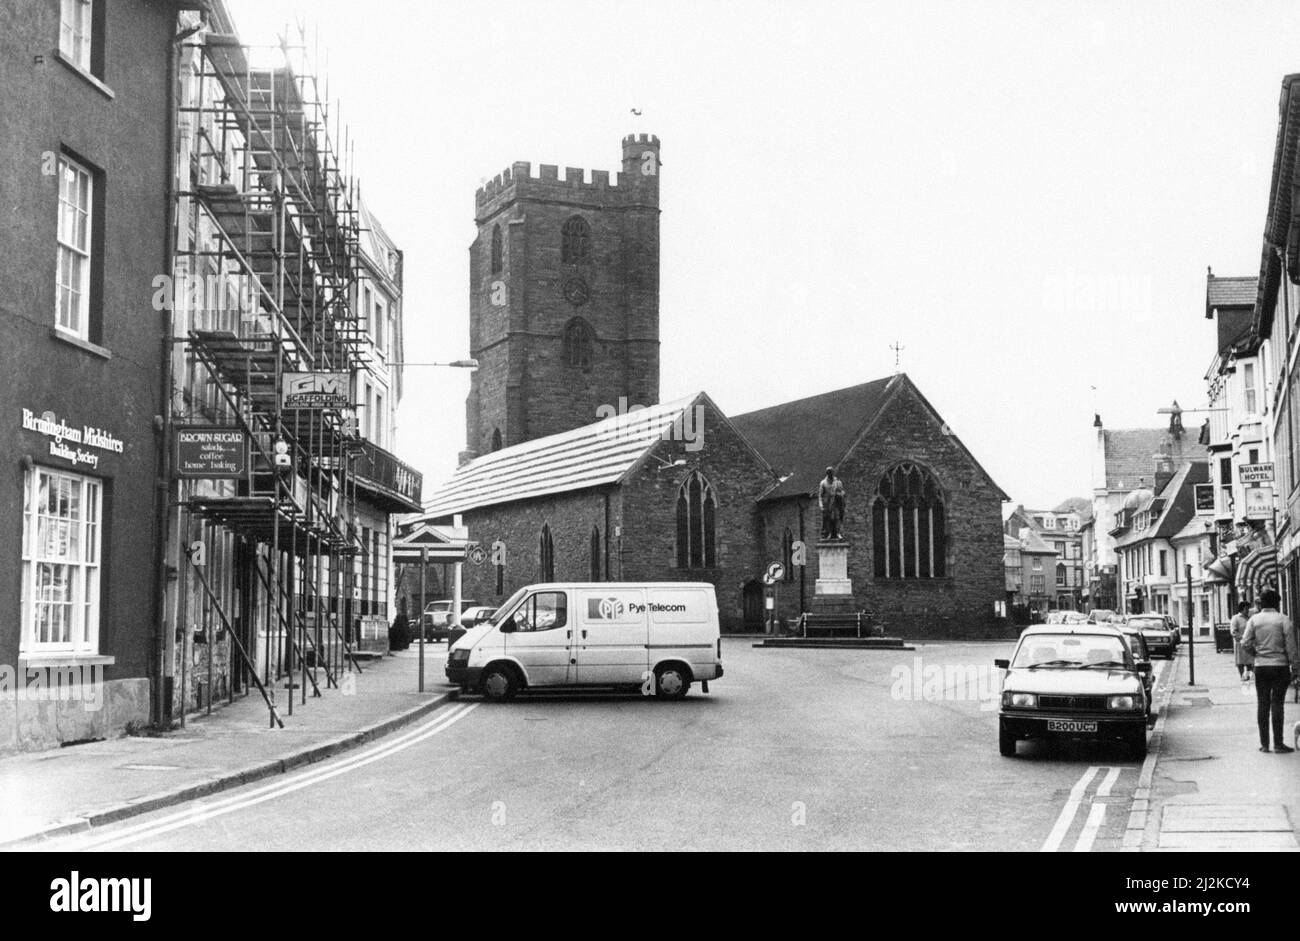 St Mary's Church, Brecon, a market town and community in Powys, Mid Wales, 18th May 1987. Stock Photo